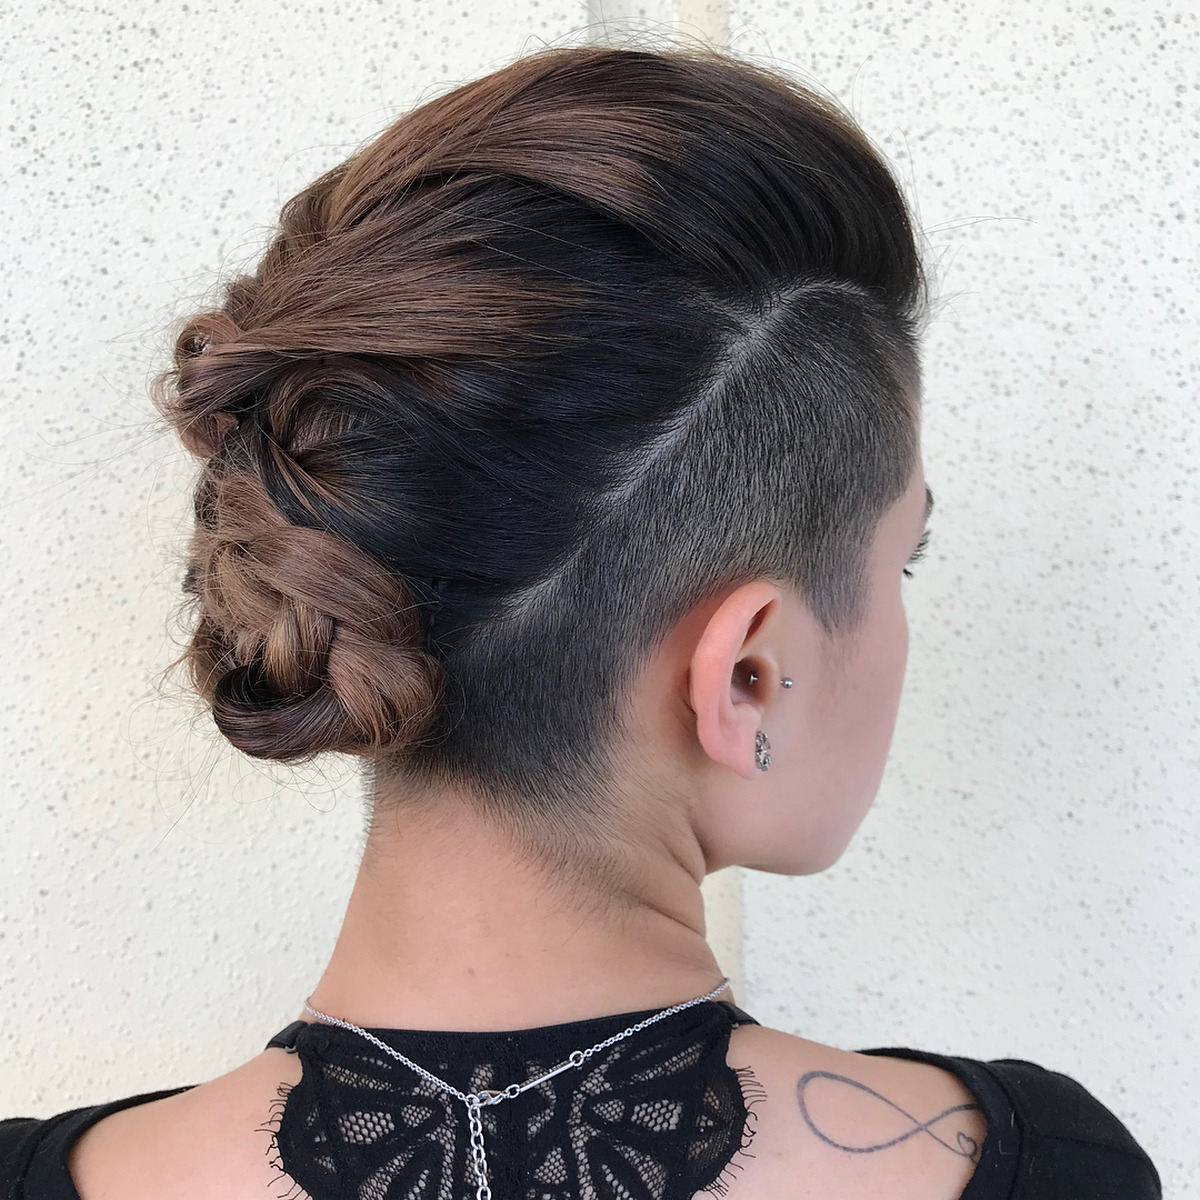 Mohawk Updo With Buzzed Shaved Sides